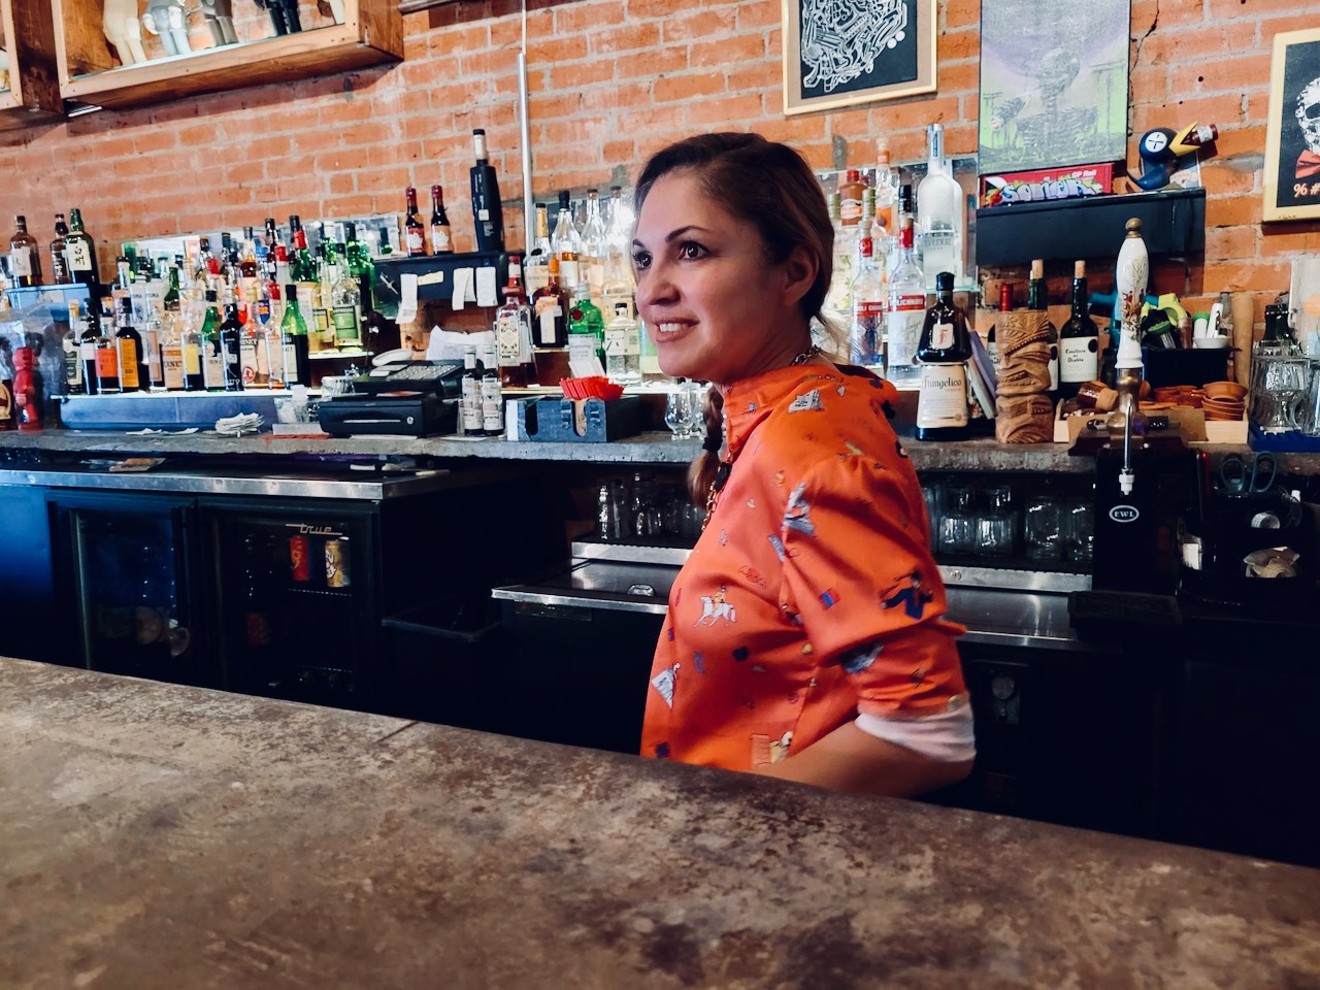 Strangeways' co-owner Rosie Ildemaro behind the bar. After 12 years in operation, the popular spot is going to court to try to remain open.